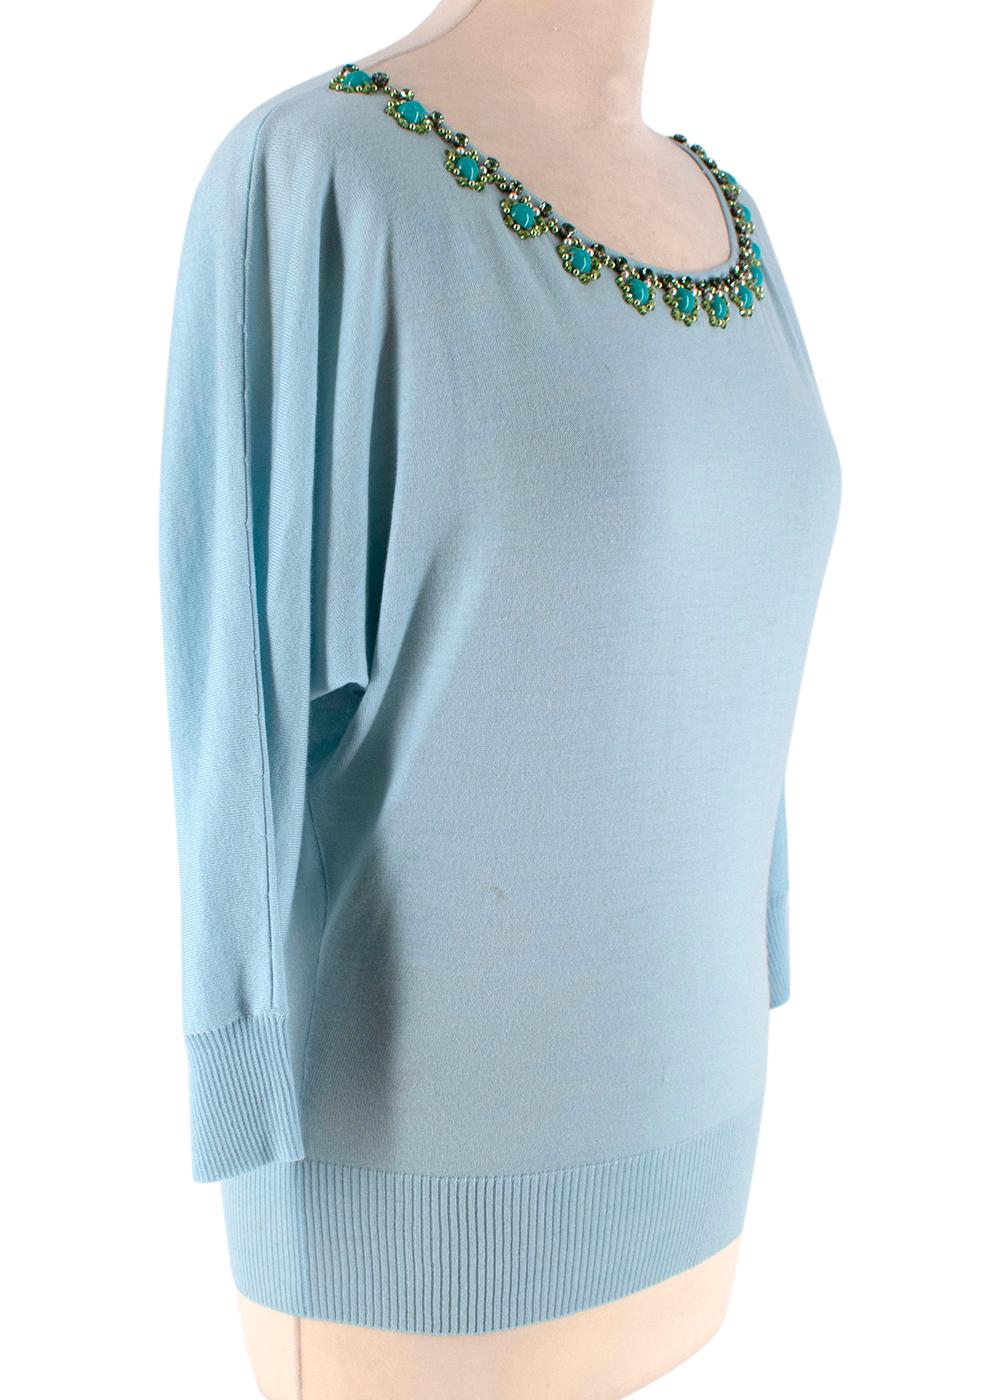 Christian Dior Blue Wool Beaded Knit Sweater

-Made of soft lightweight wool texture 
-Gorgeous green crystal and faux pearl embellishment to the neckline 
-Round neckline 
-Kimono style sleeves 
-Ribbed hems and cuffs 
-Classic timeless design